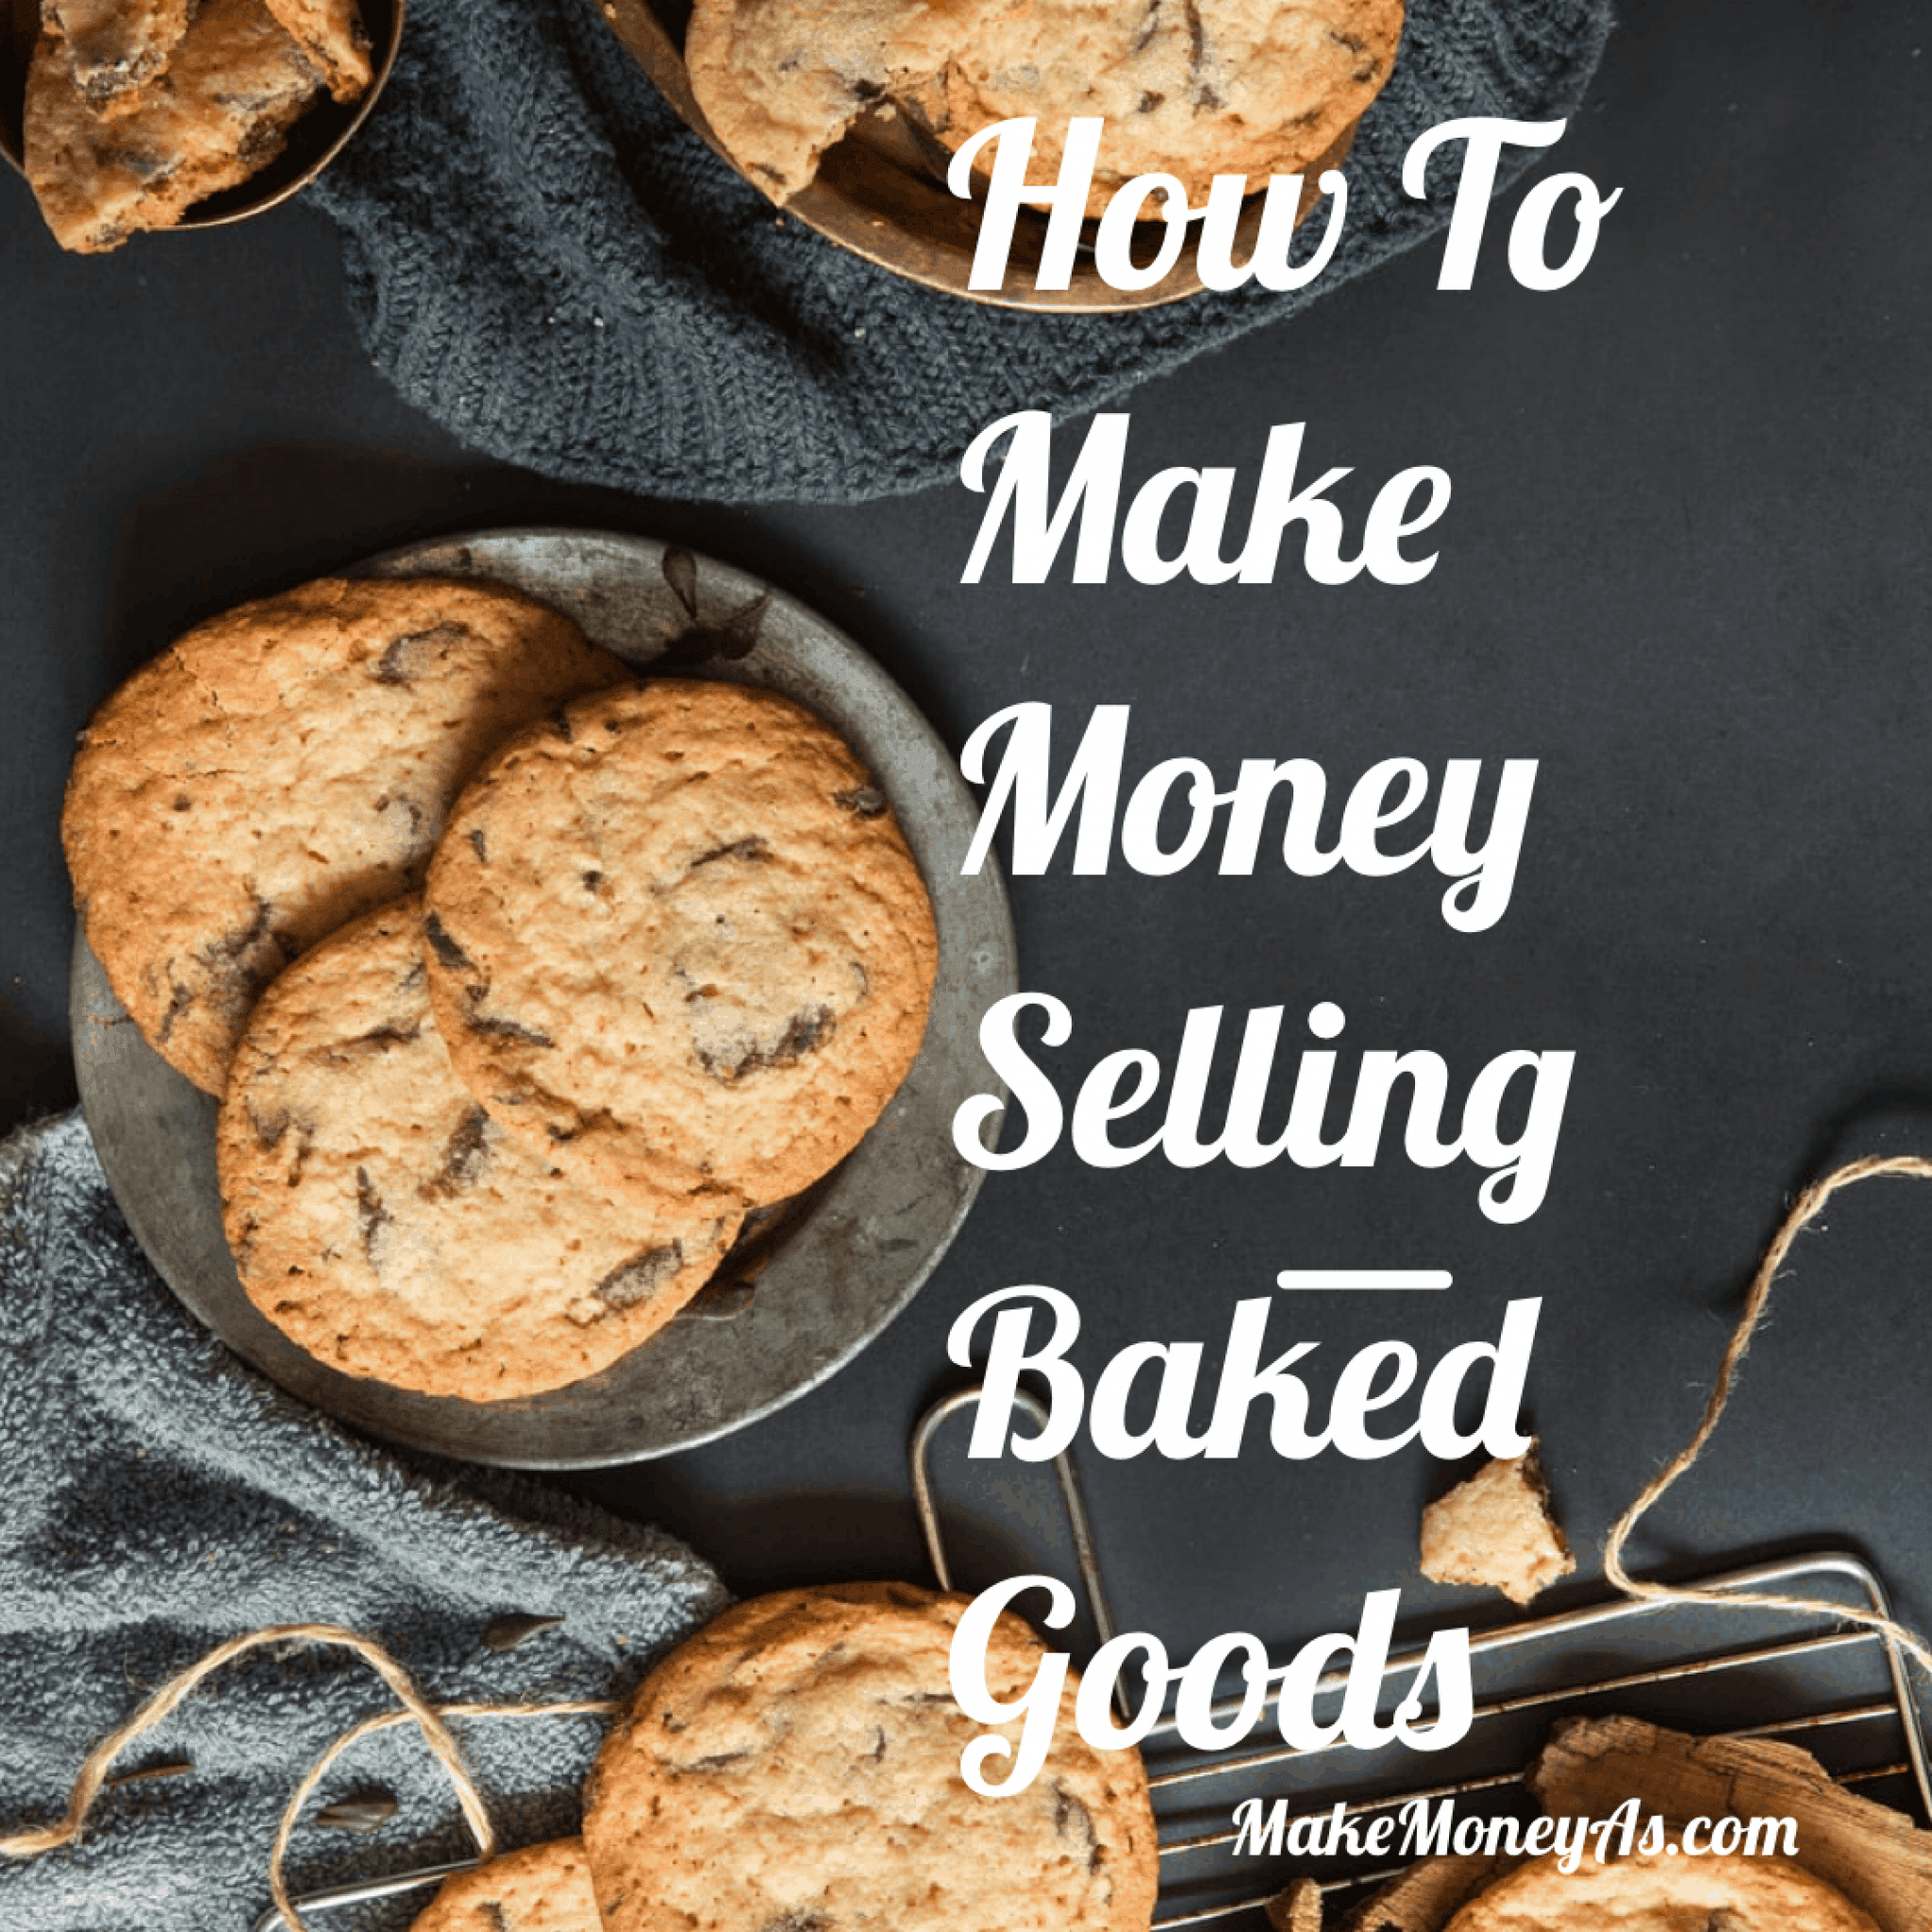 How To Make Money Selling Baked Goods